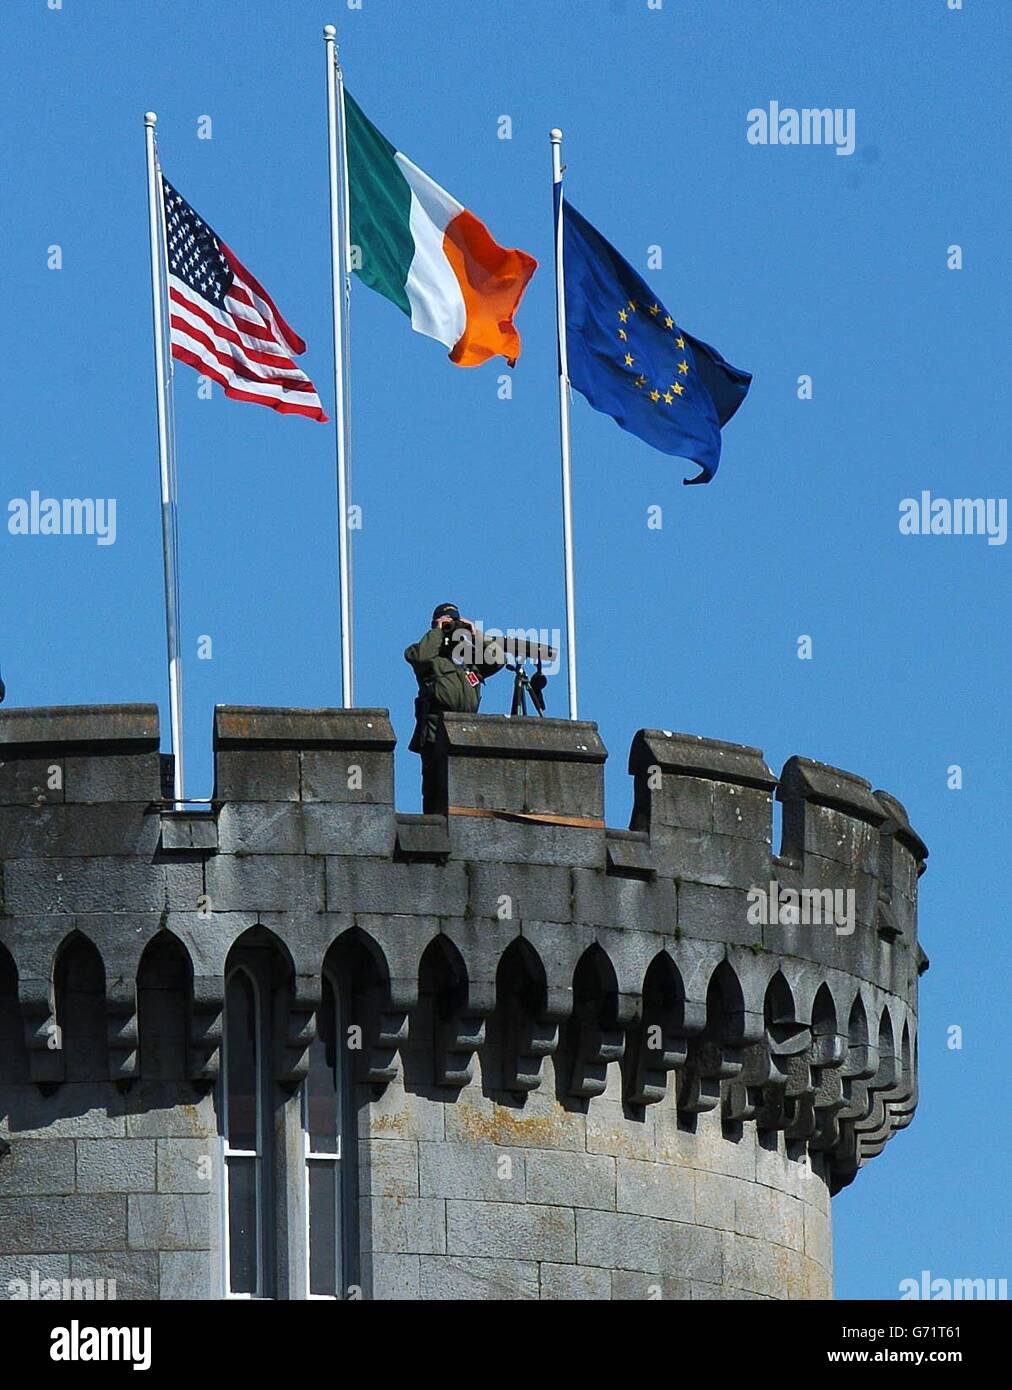 The flags of the USA , Ireland and The EU fly over Dromoland Castle, County Clare, Ireland, as an army officer watches the surrounding countryside. US President George Bush is attending a major EU-US summit at Dromoland Castle amid the largest security operation ever staged in the Irish state. Stock Photo